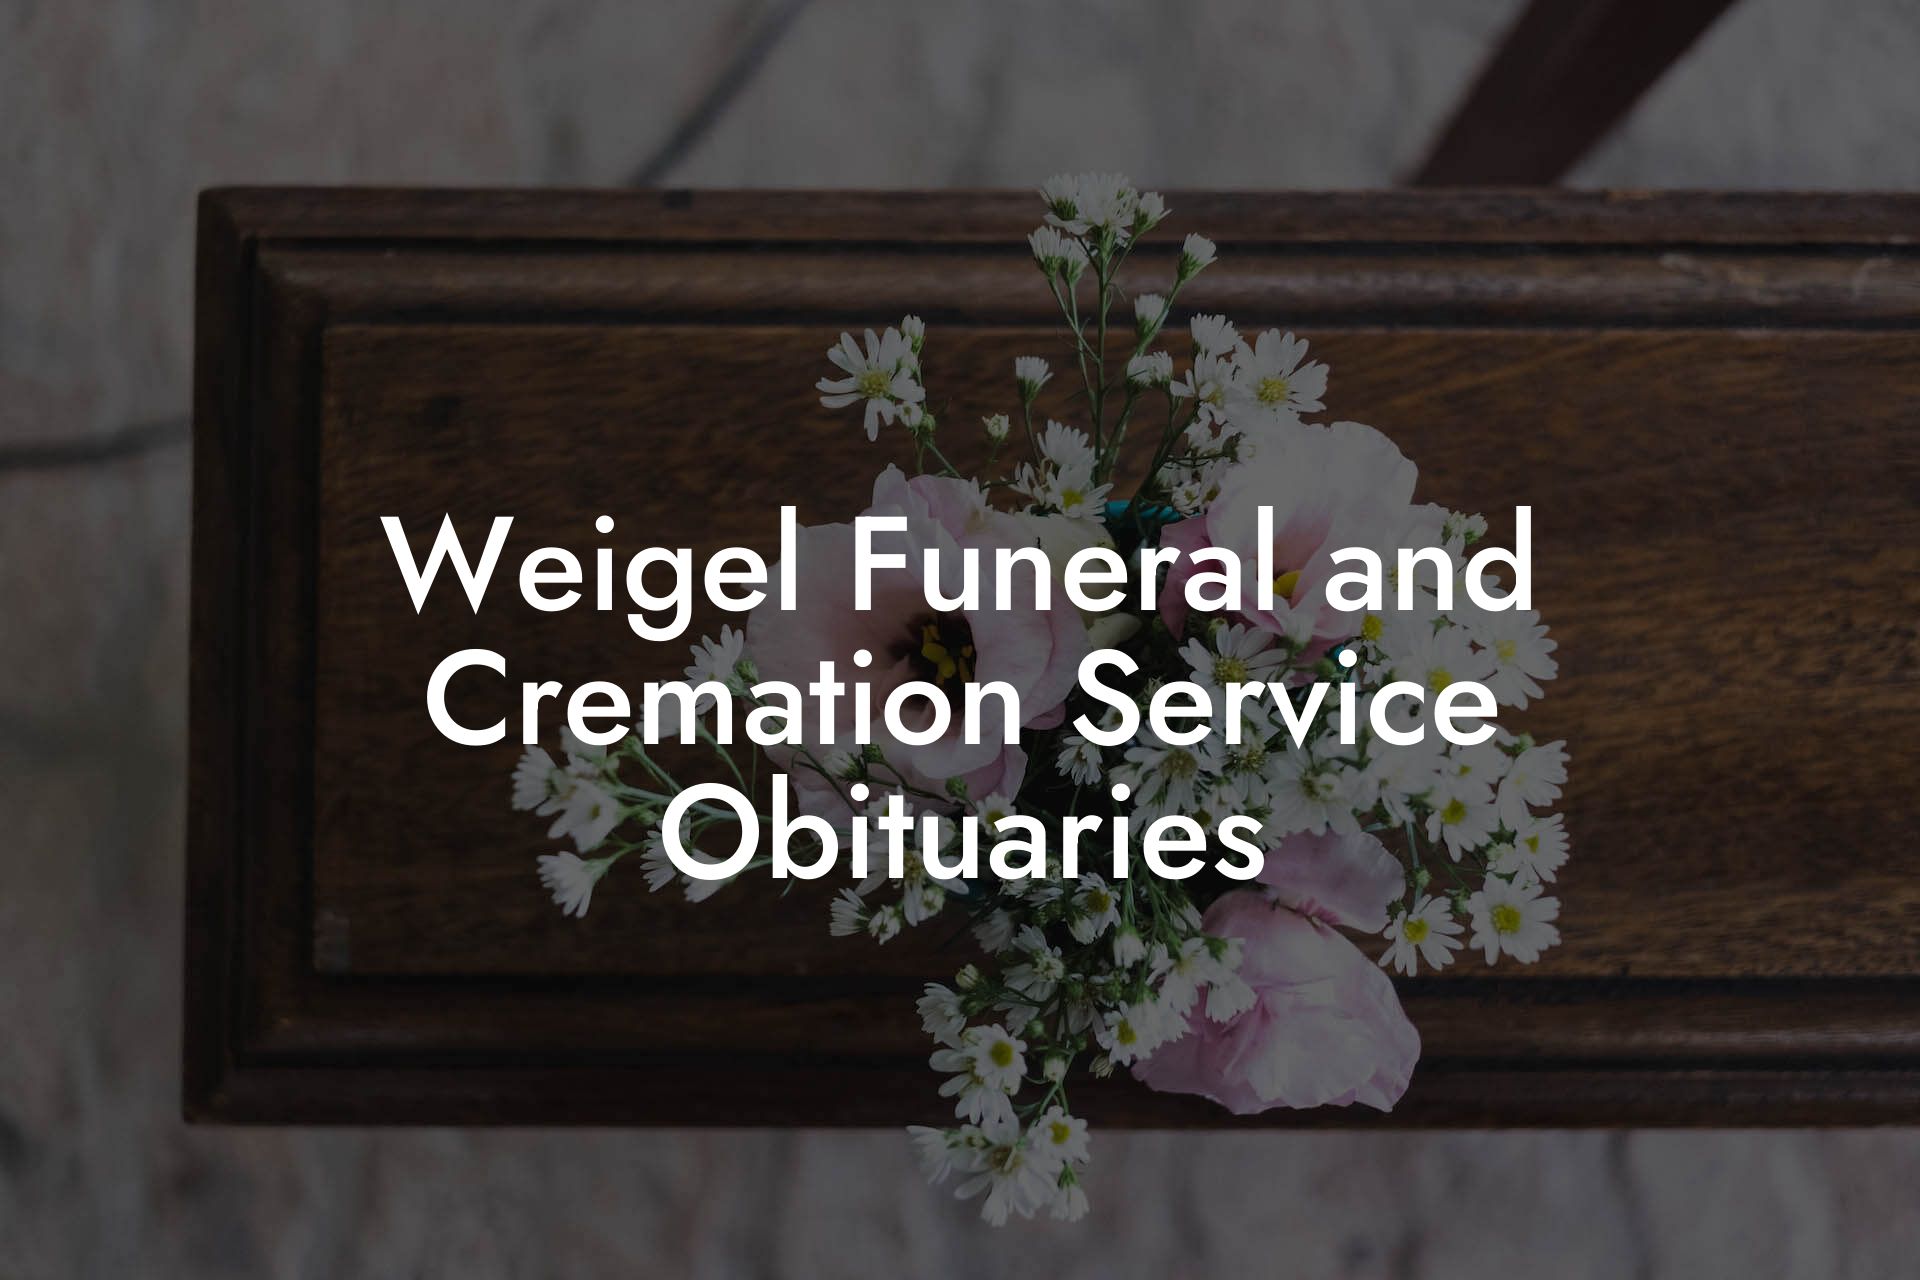 Weigel Funeral and Cremation Service Obituaries